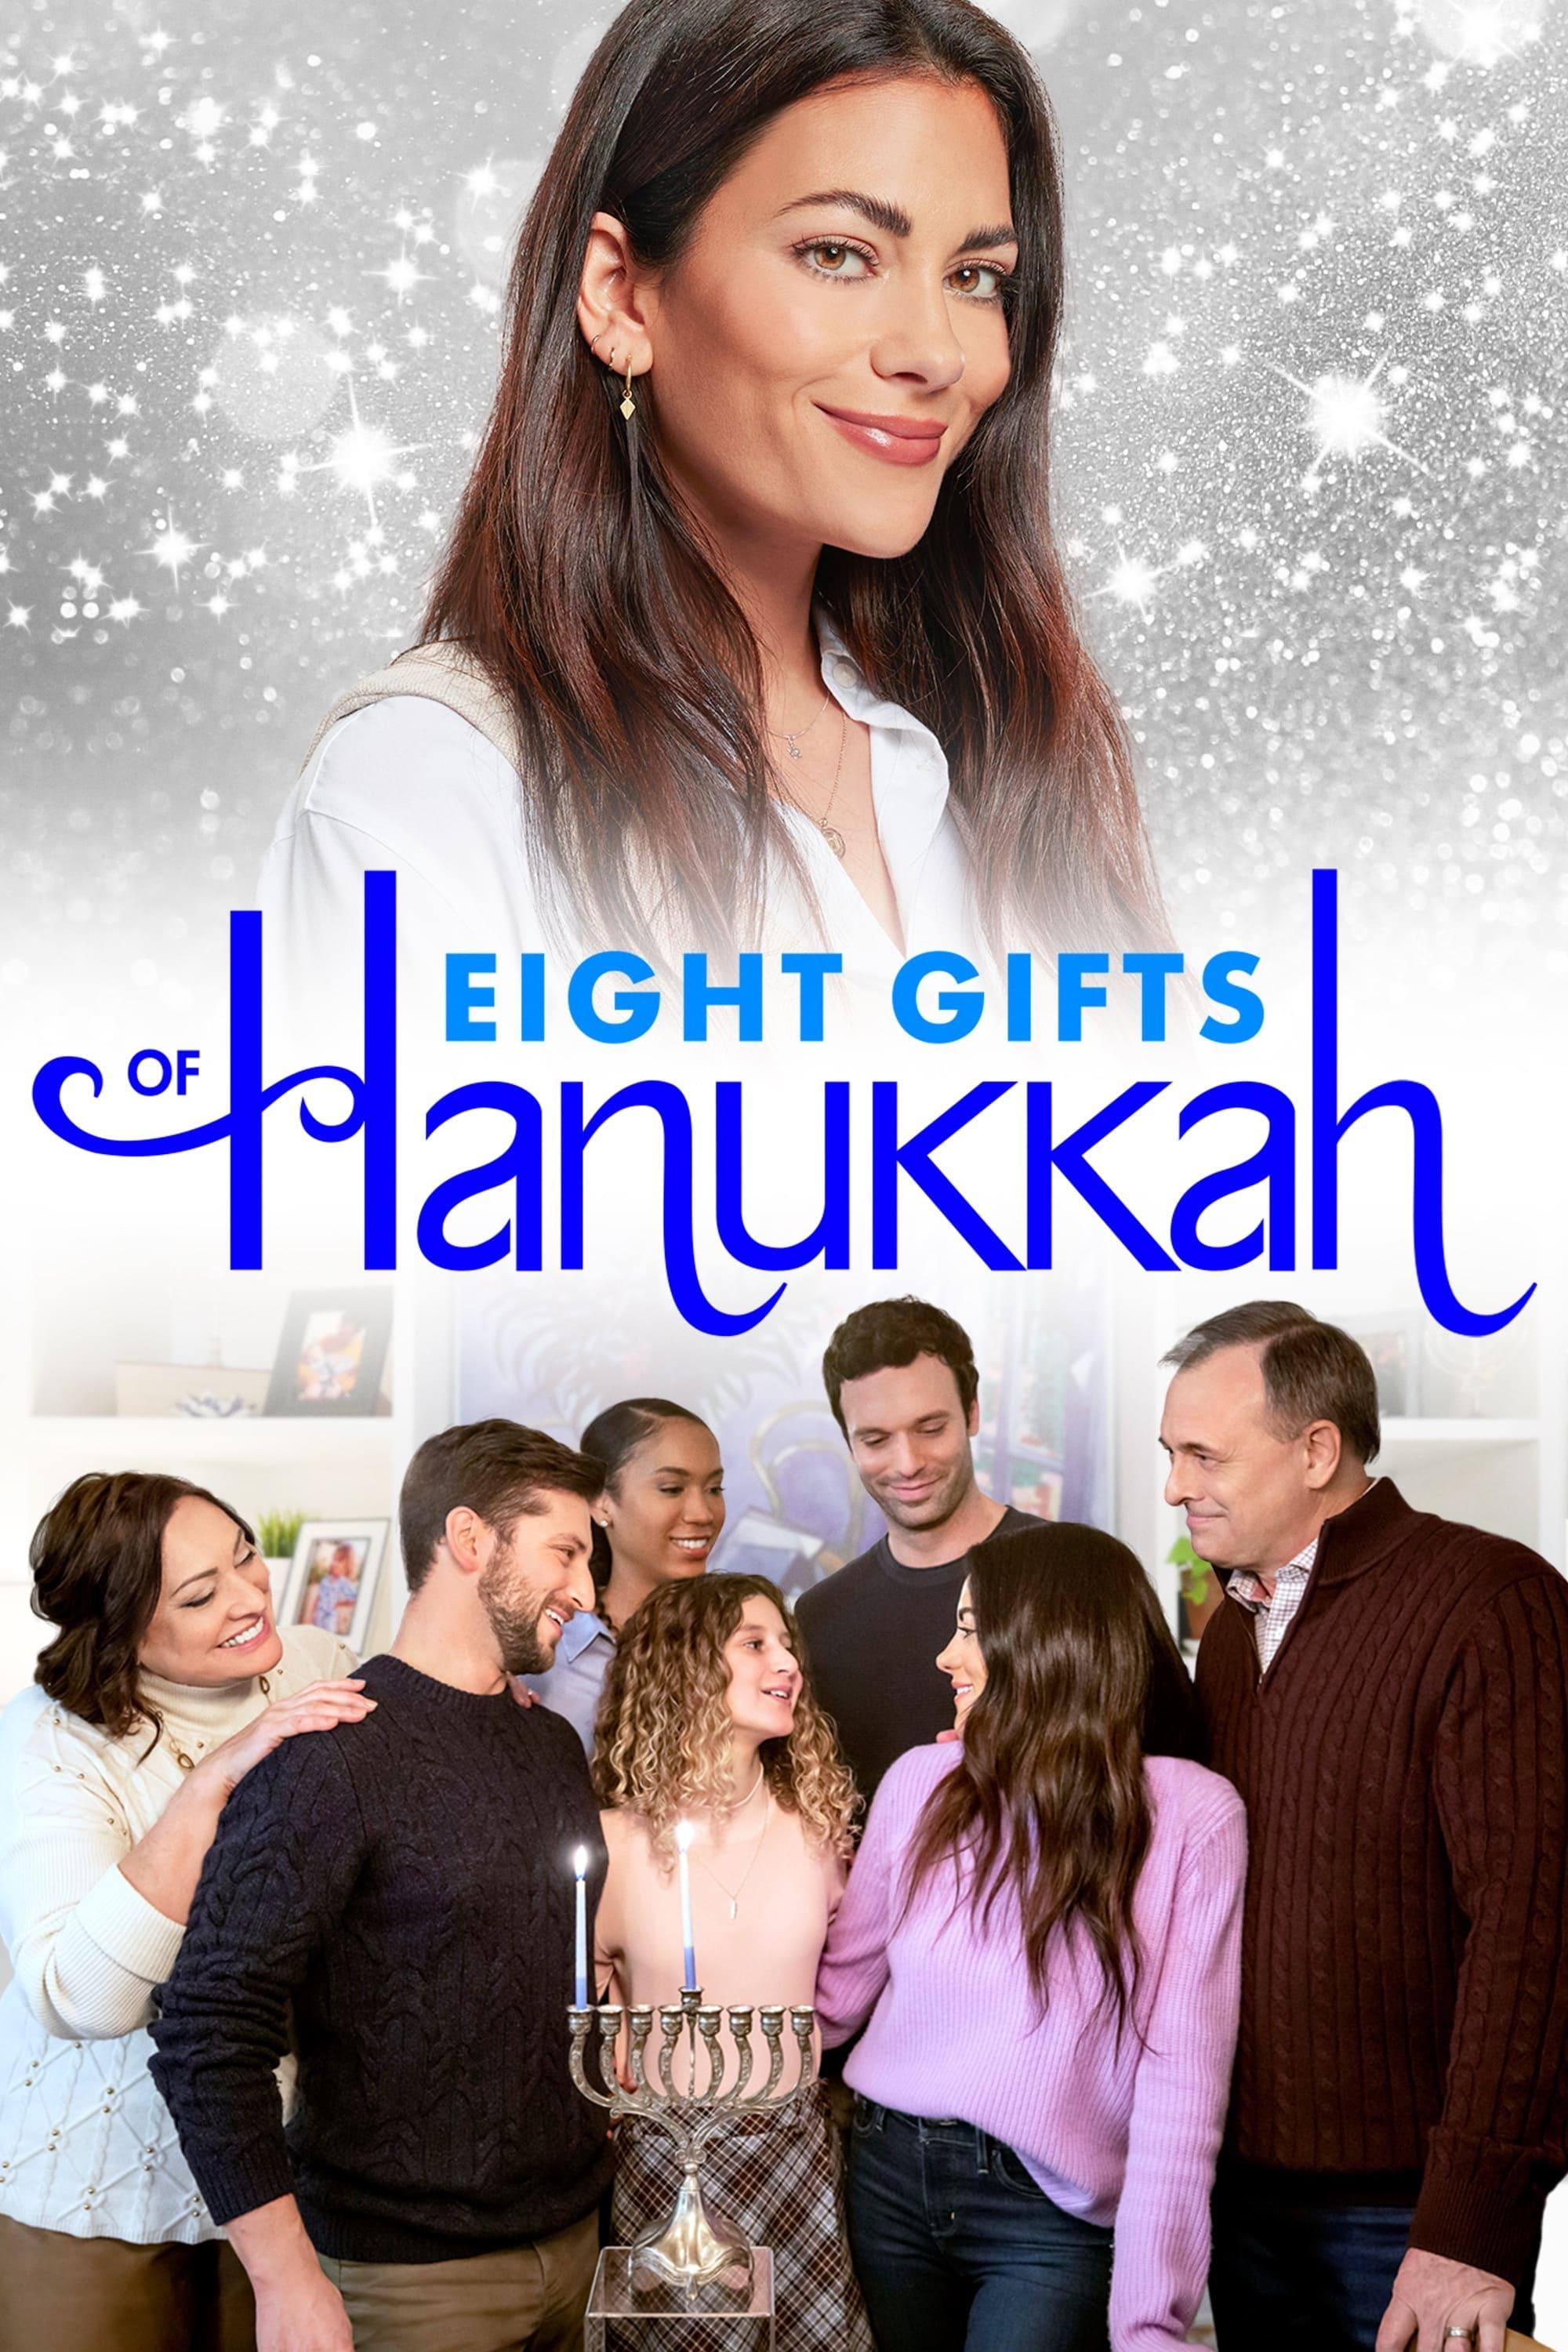 Eight Gifts of Hanukkah poster